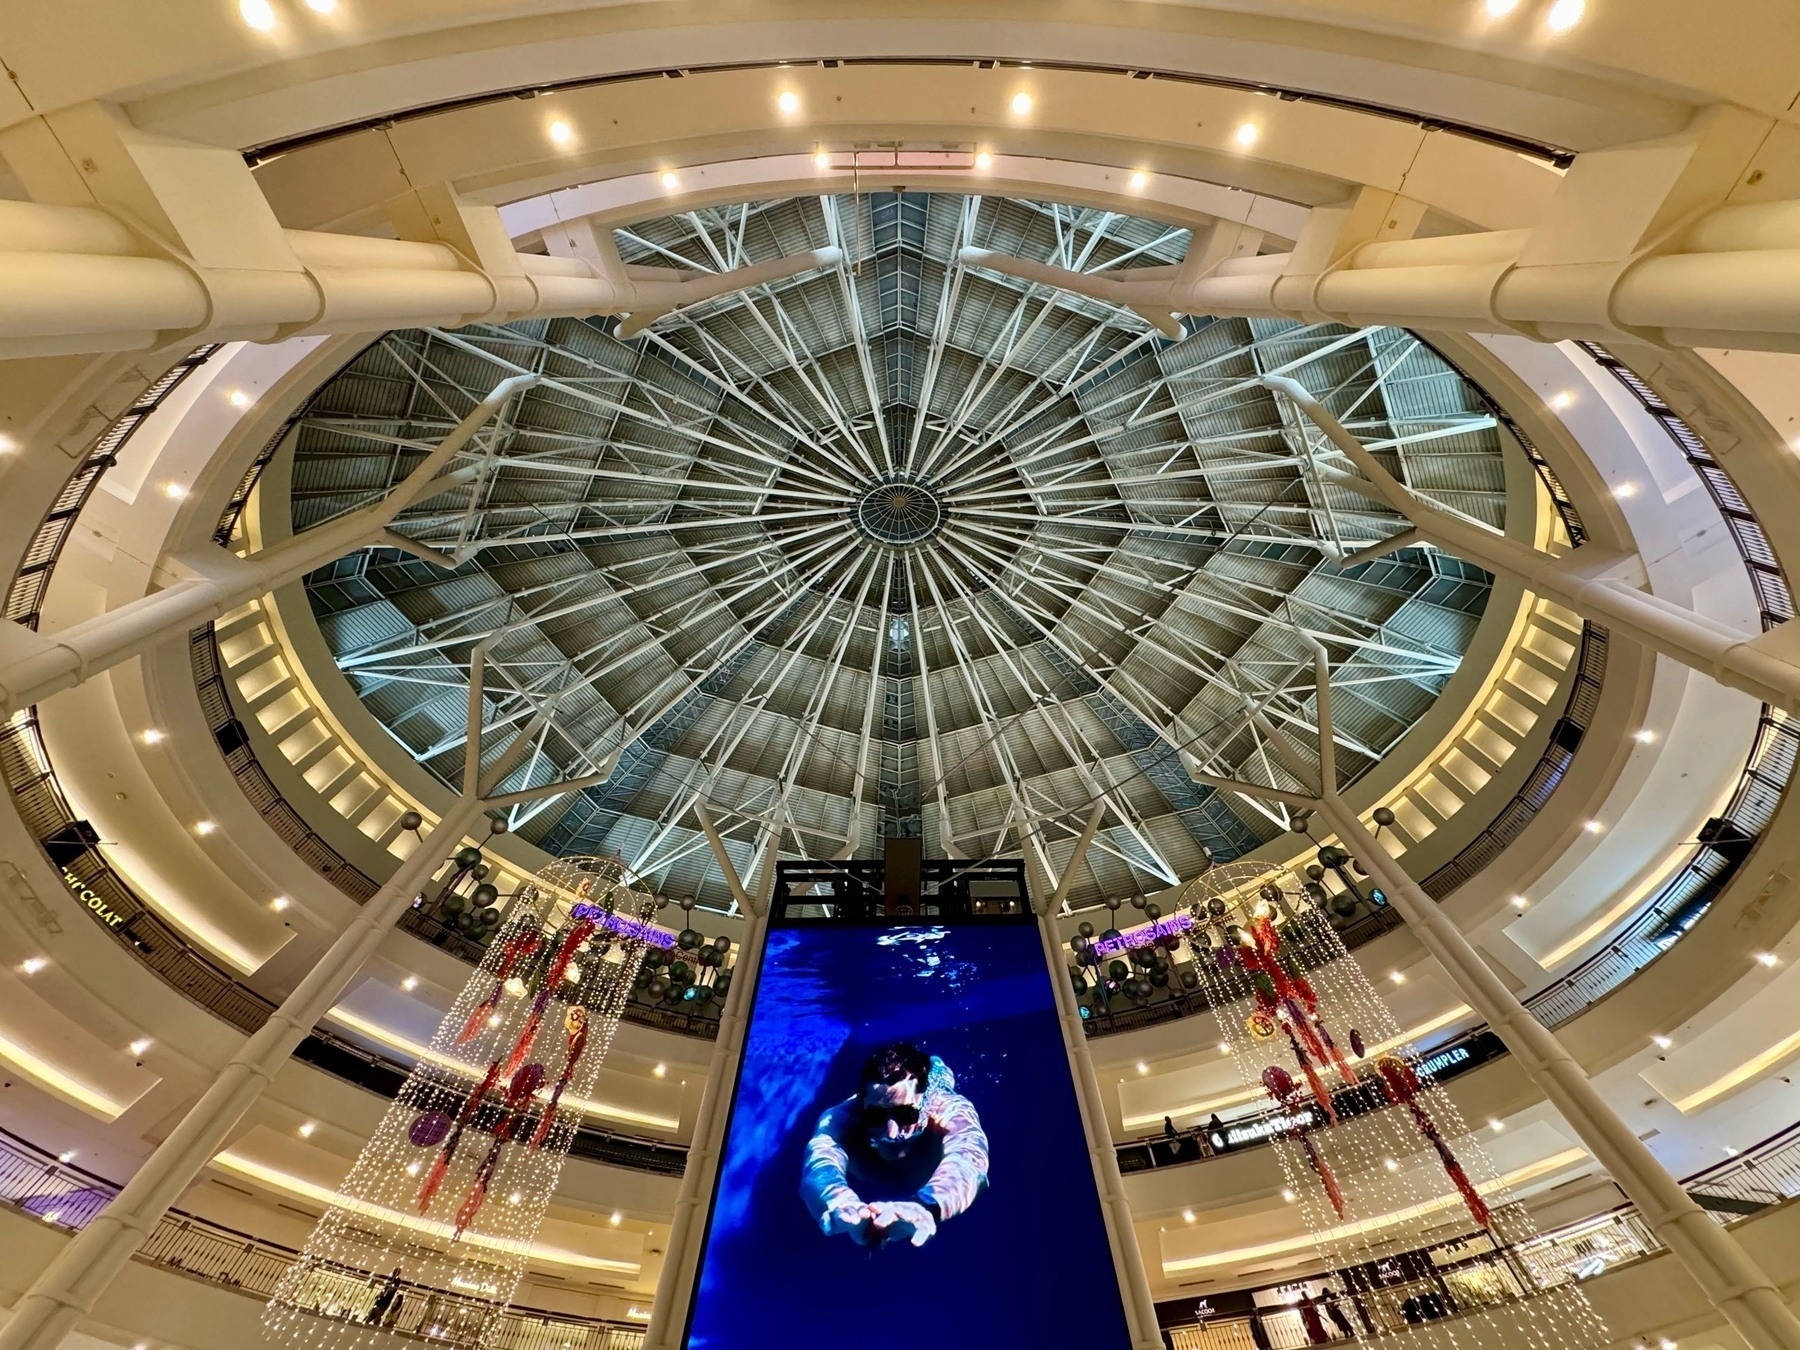 Looking up towards the central ceiling dome in a shopping mall, with a large screen in front. On the screen a man is shown snorkelling towards us through blue water